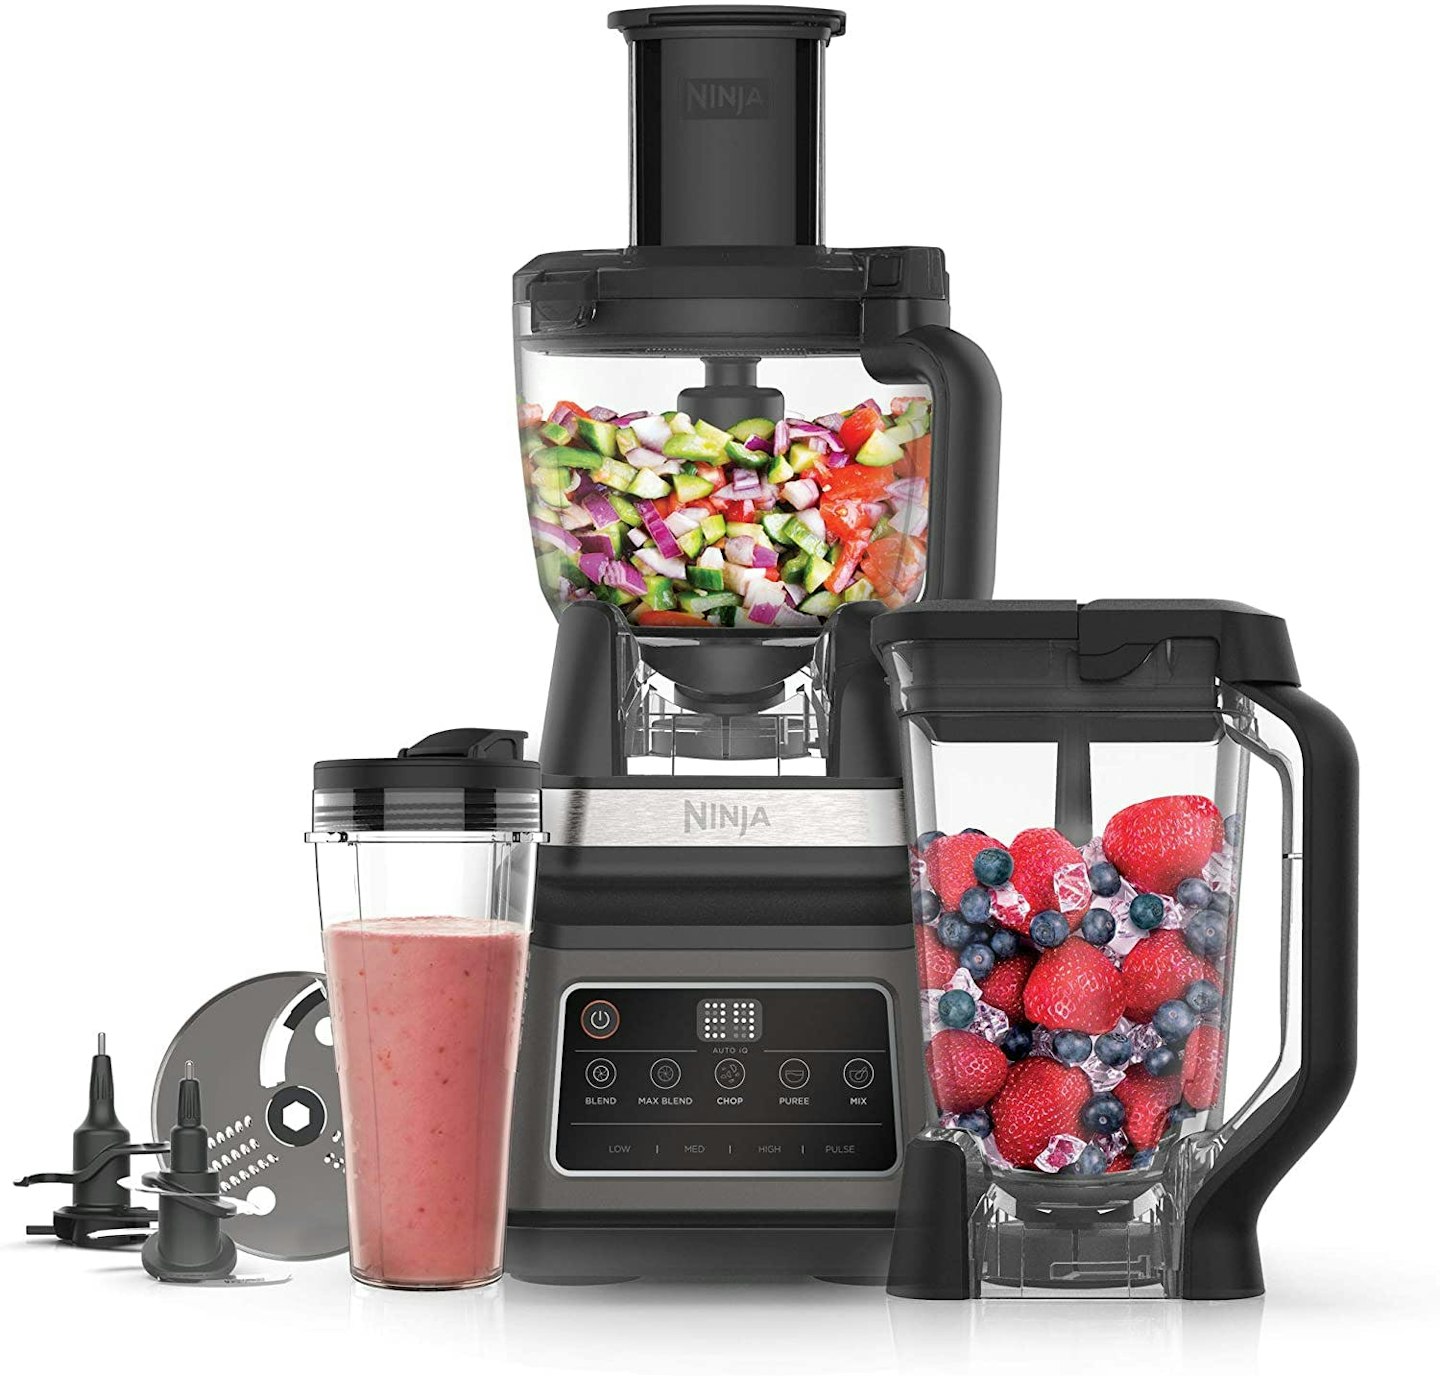 Ninja 3-in-1 Food Processor and Blender with Auto-iQ